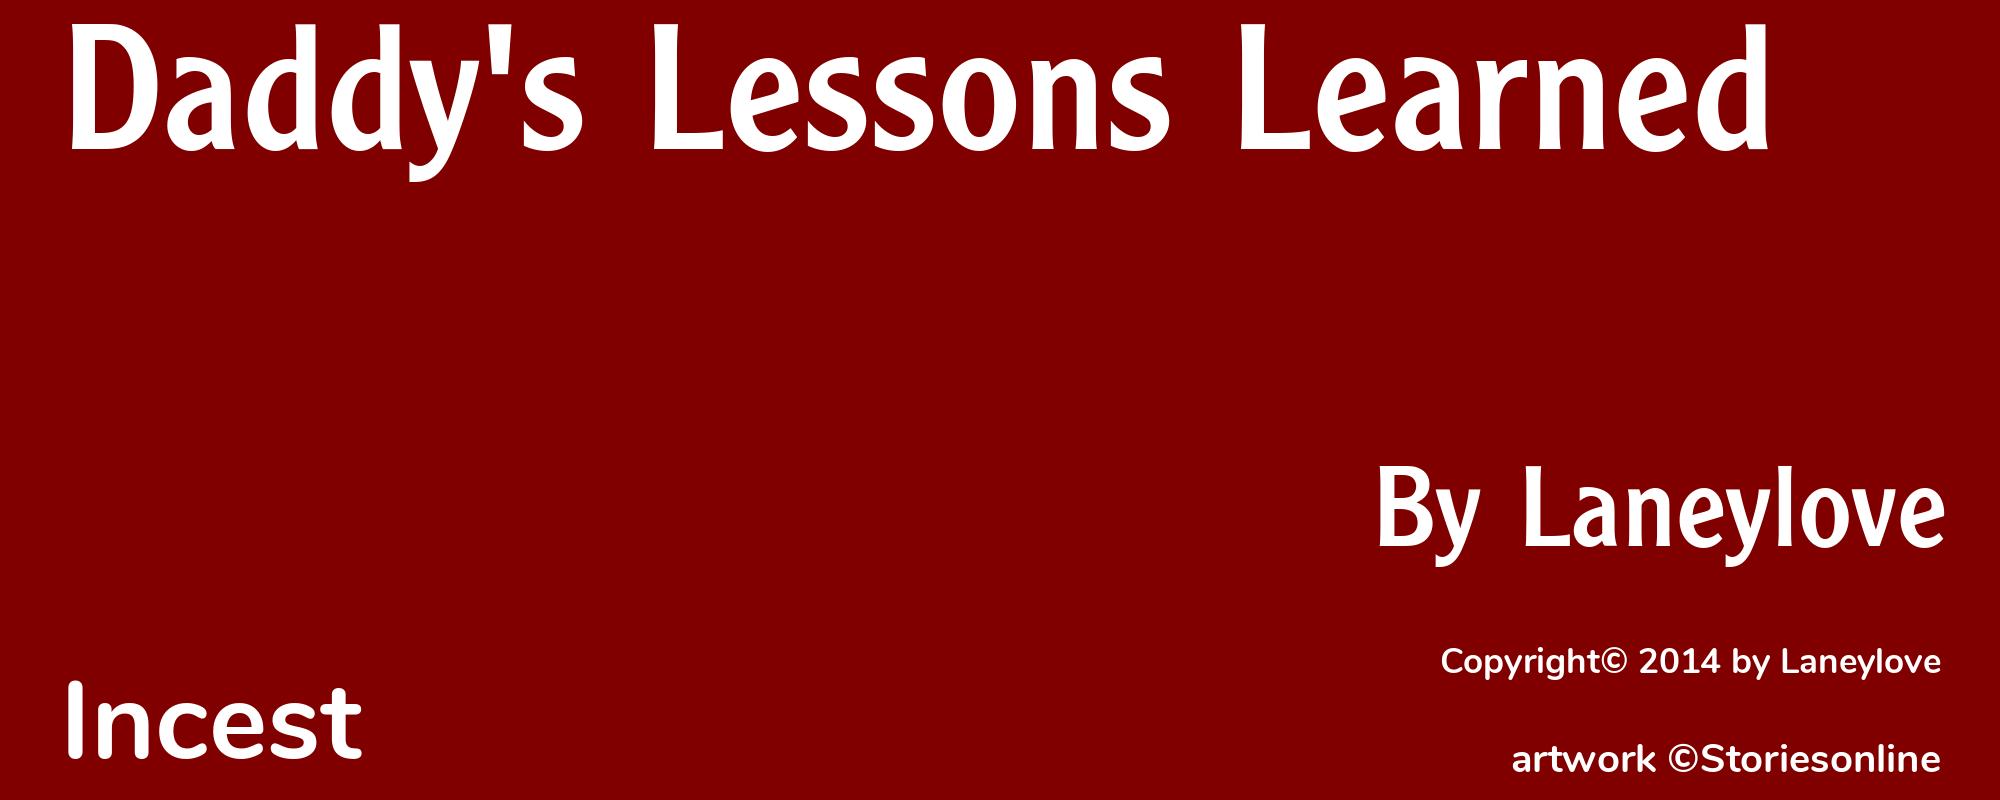 Daddy's Lessons Learned - Cover